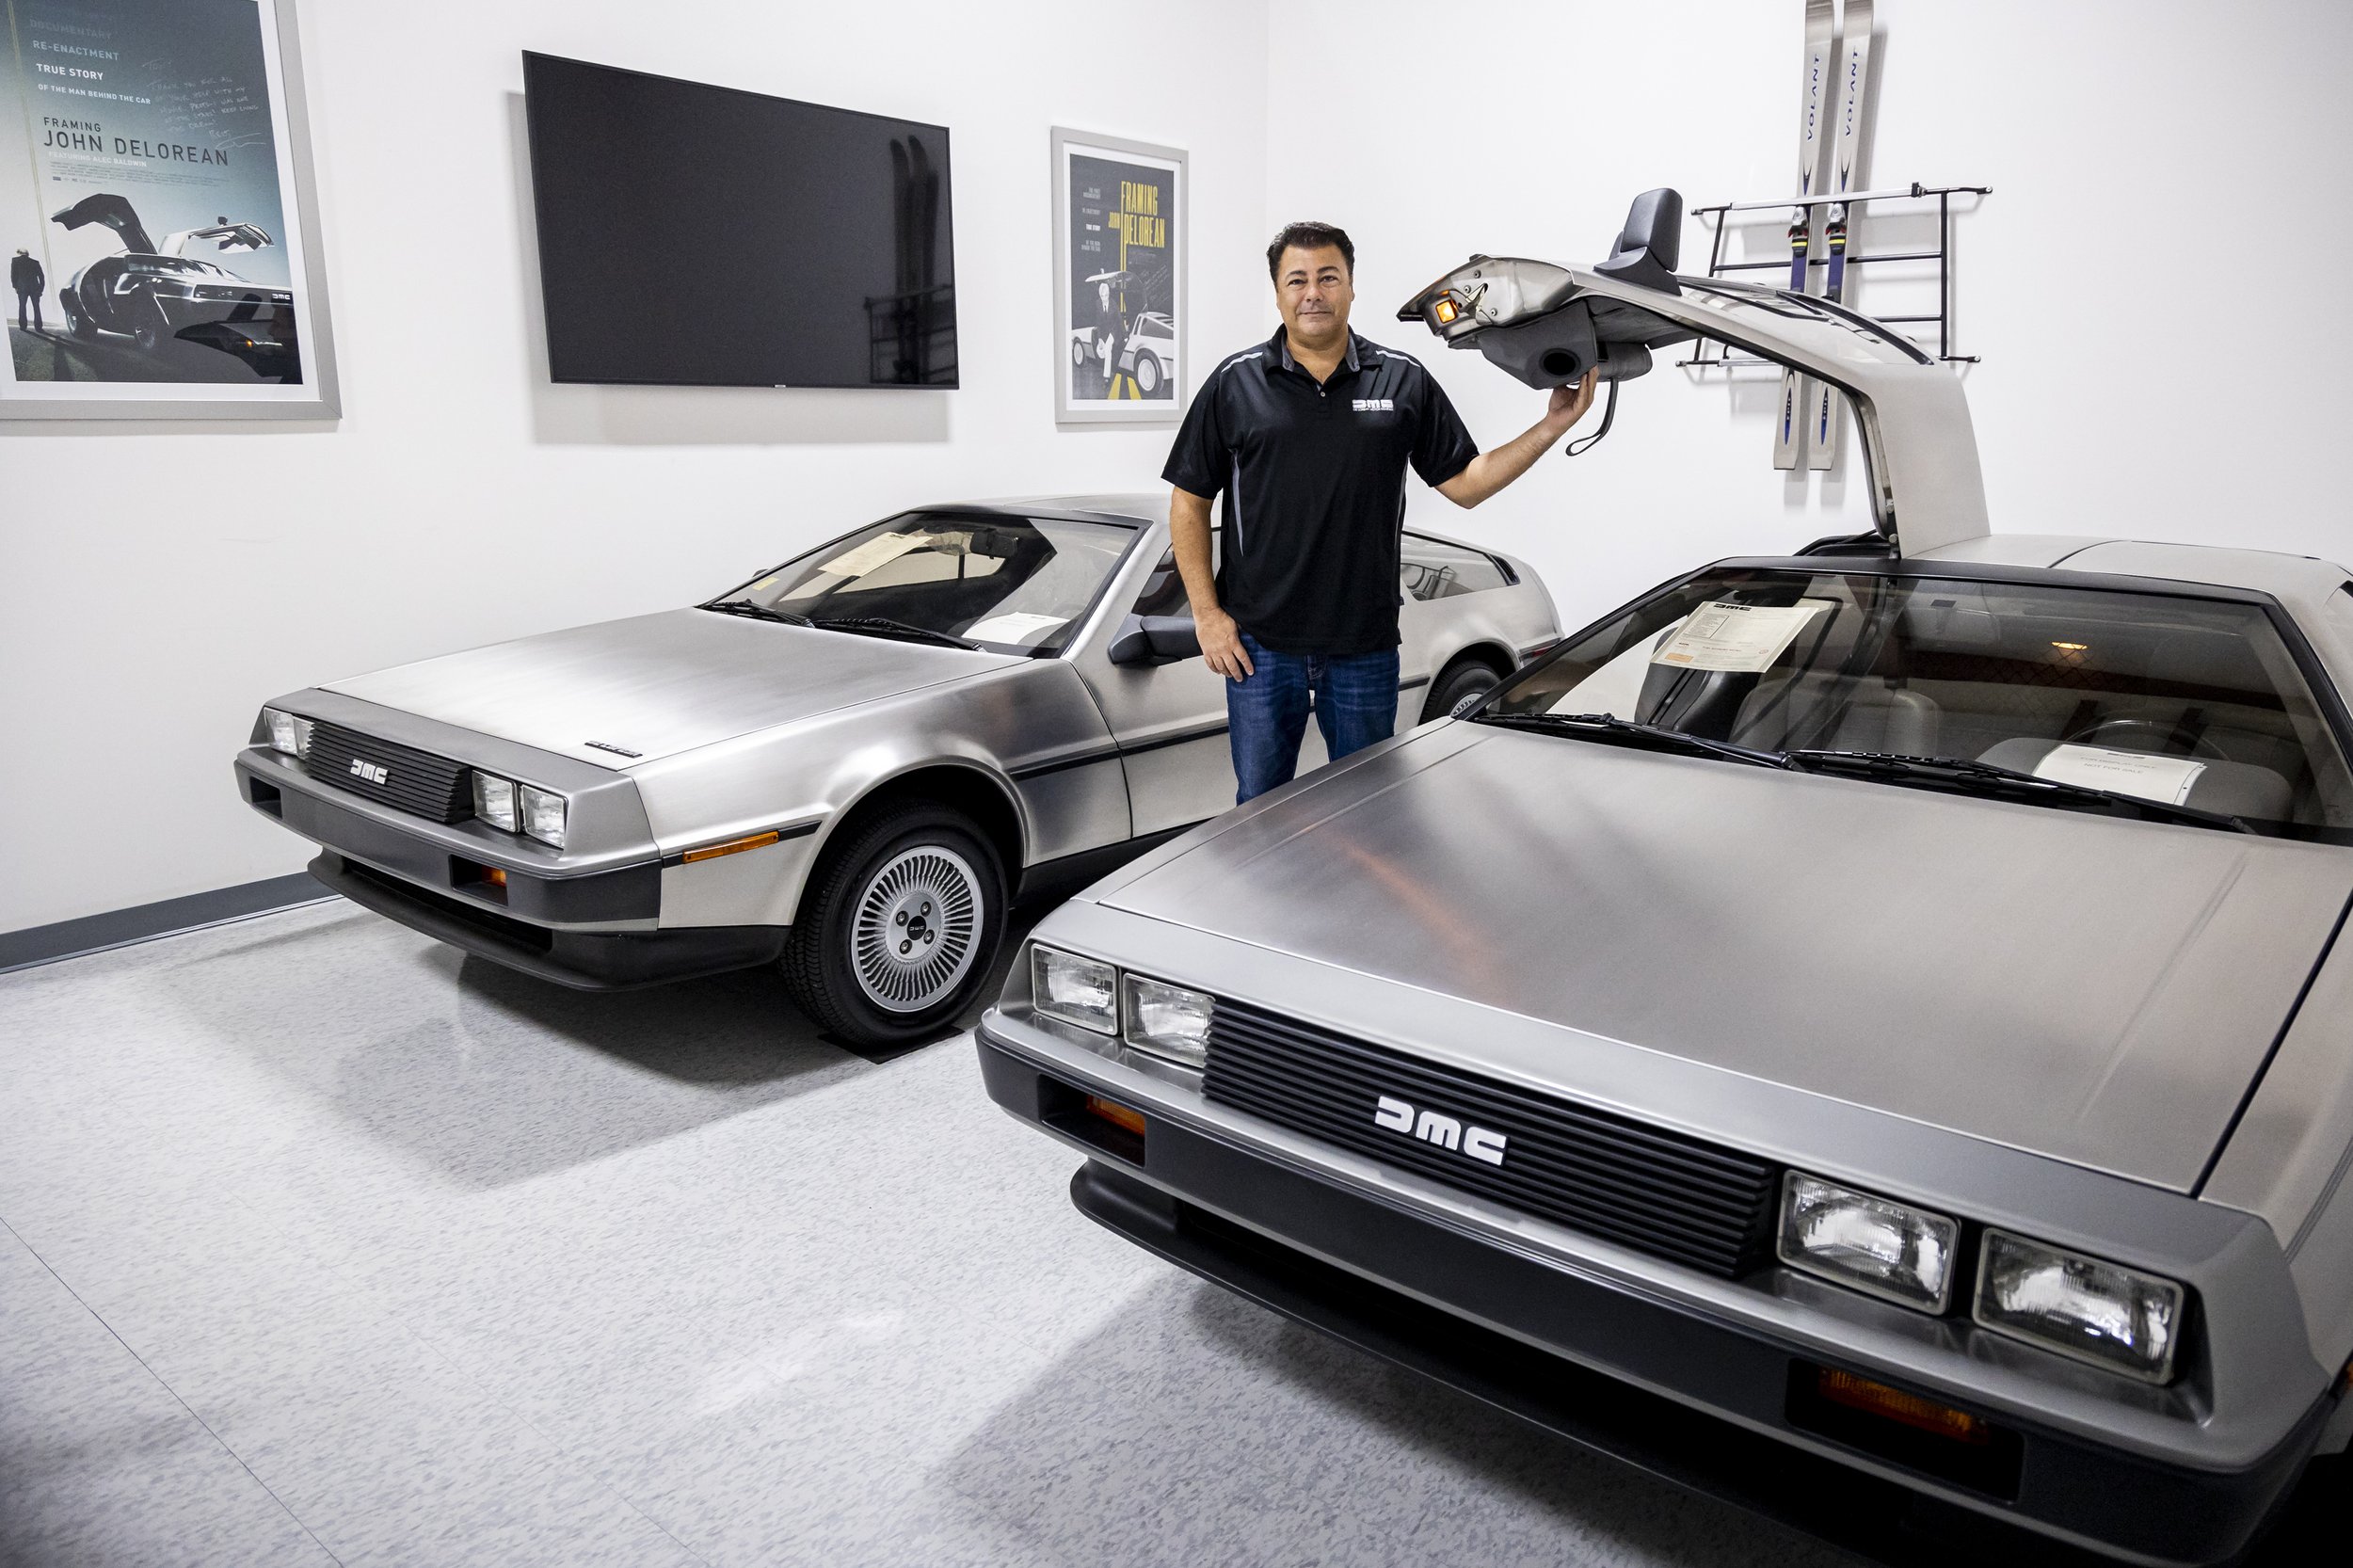  Tony Ierardi, owner of DeLorean at DeLorean Motor Company Florida, shows off his pristine DMC-12 that he is the original owner of in Orlando on Wednesday, Oct. 19, 2022. 